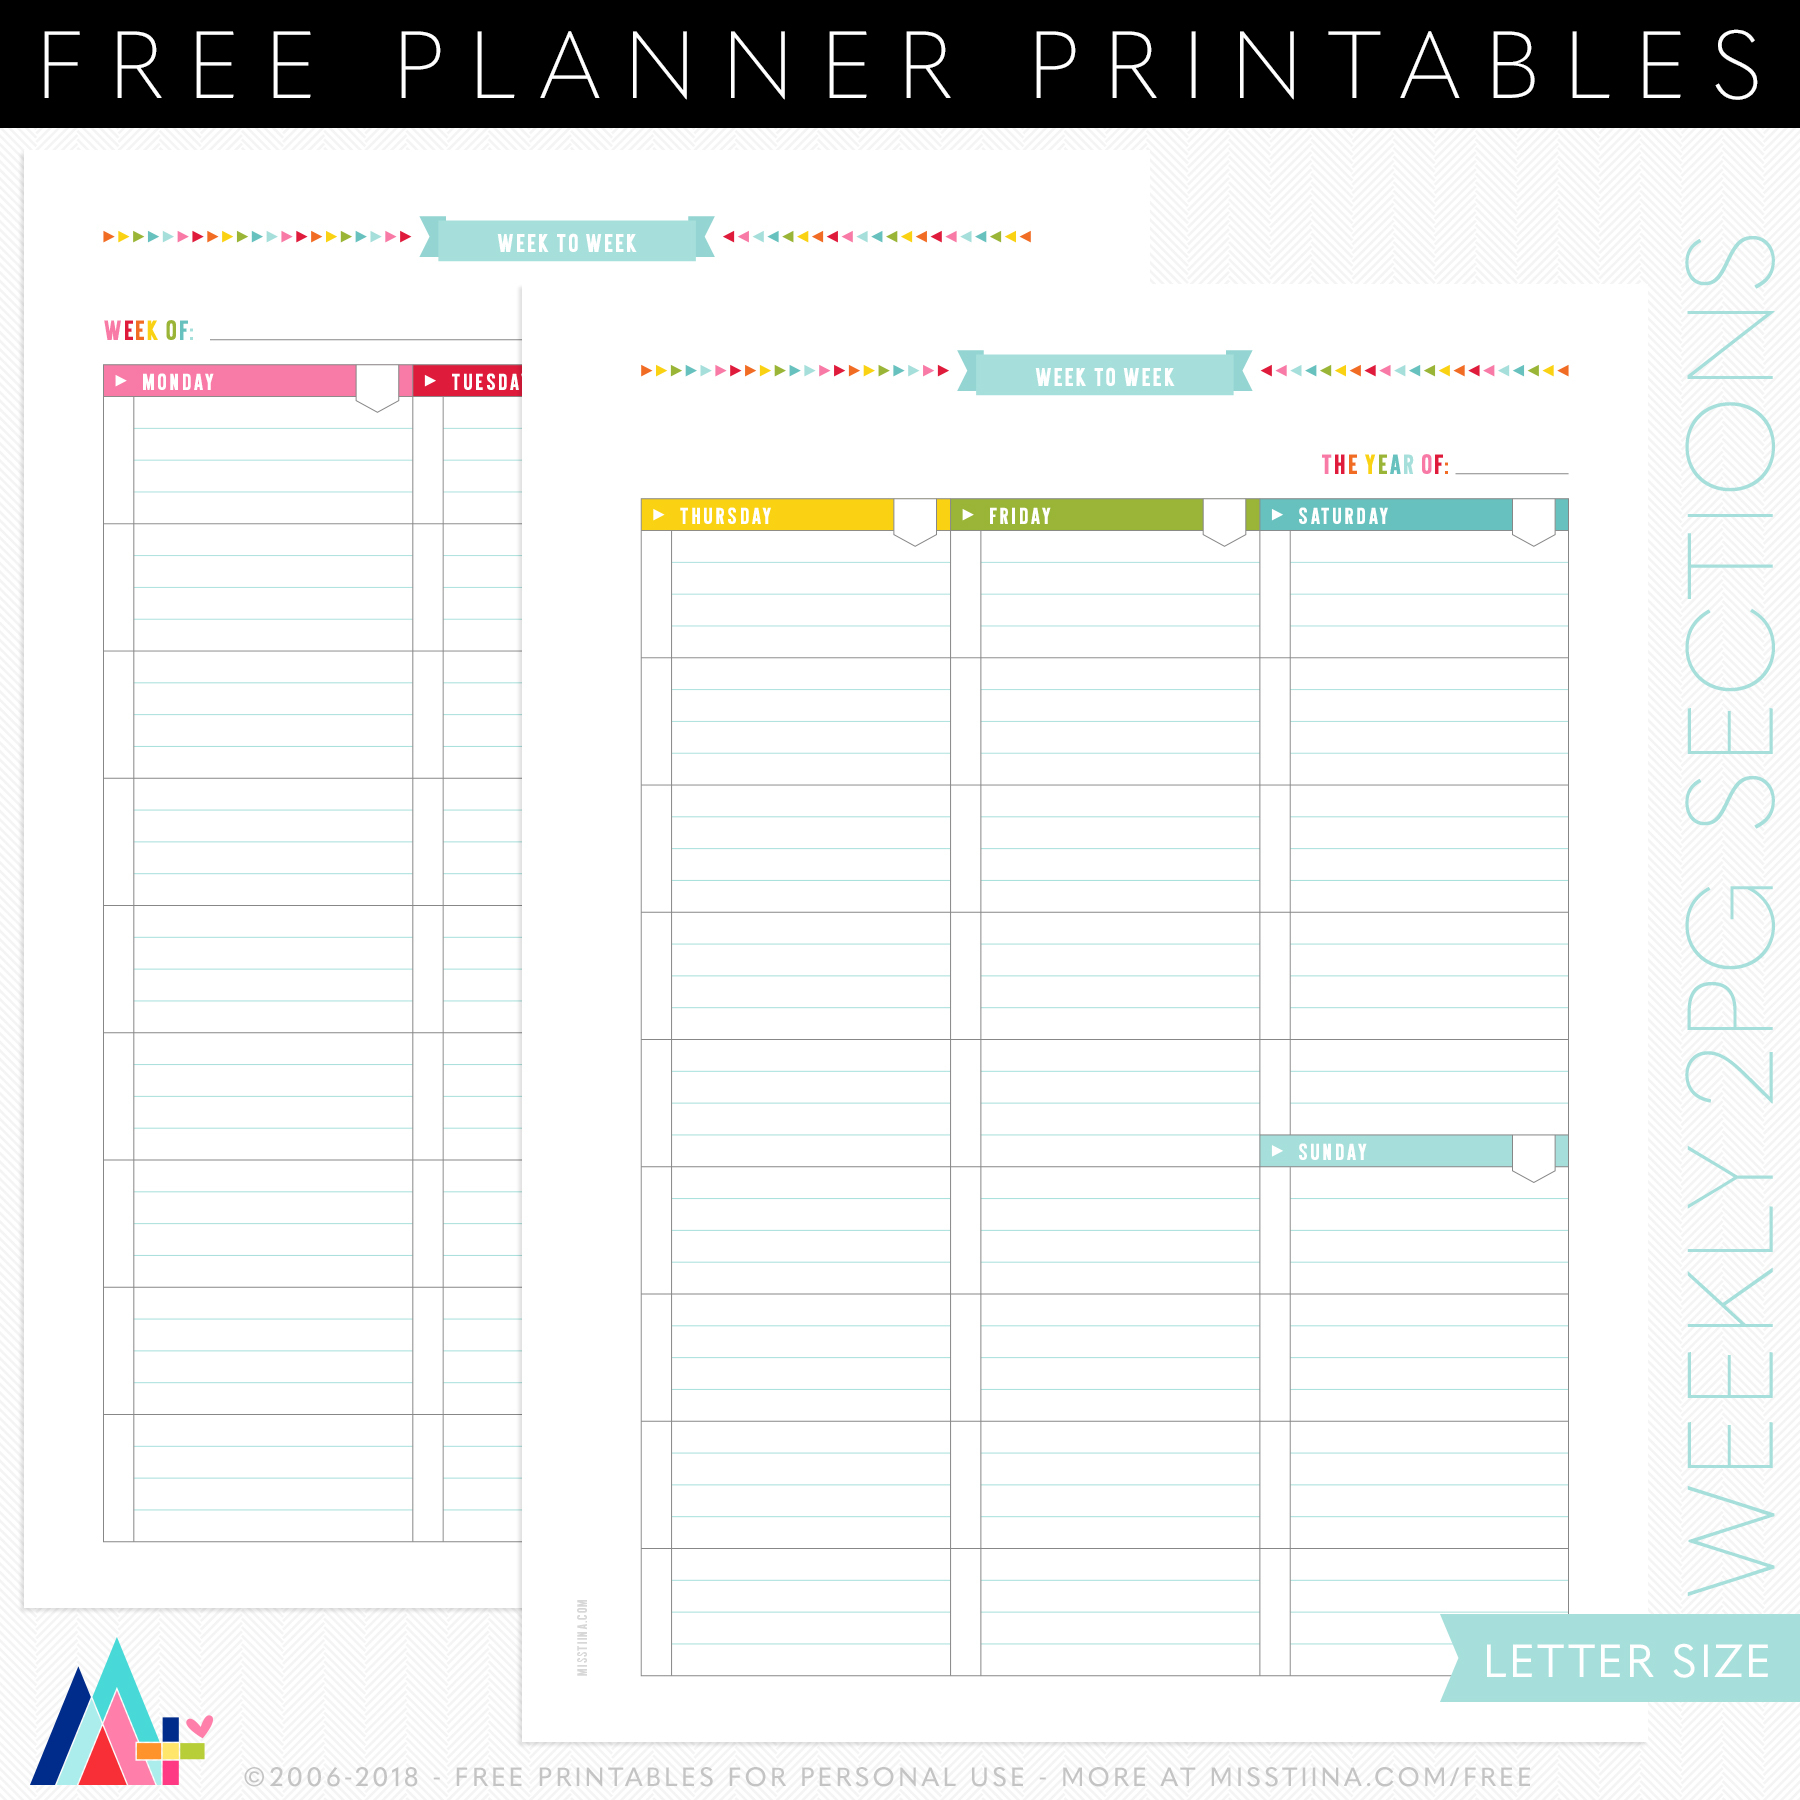 Free Printable Weekly Planner For Teachers | Printable pertaining to Free Printable Weekly Planner With Time Slots